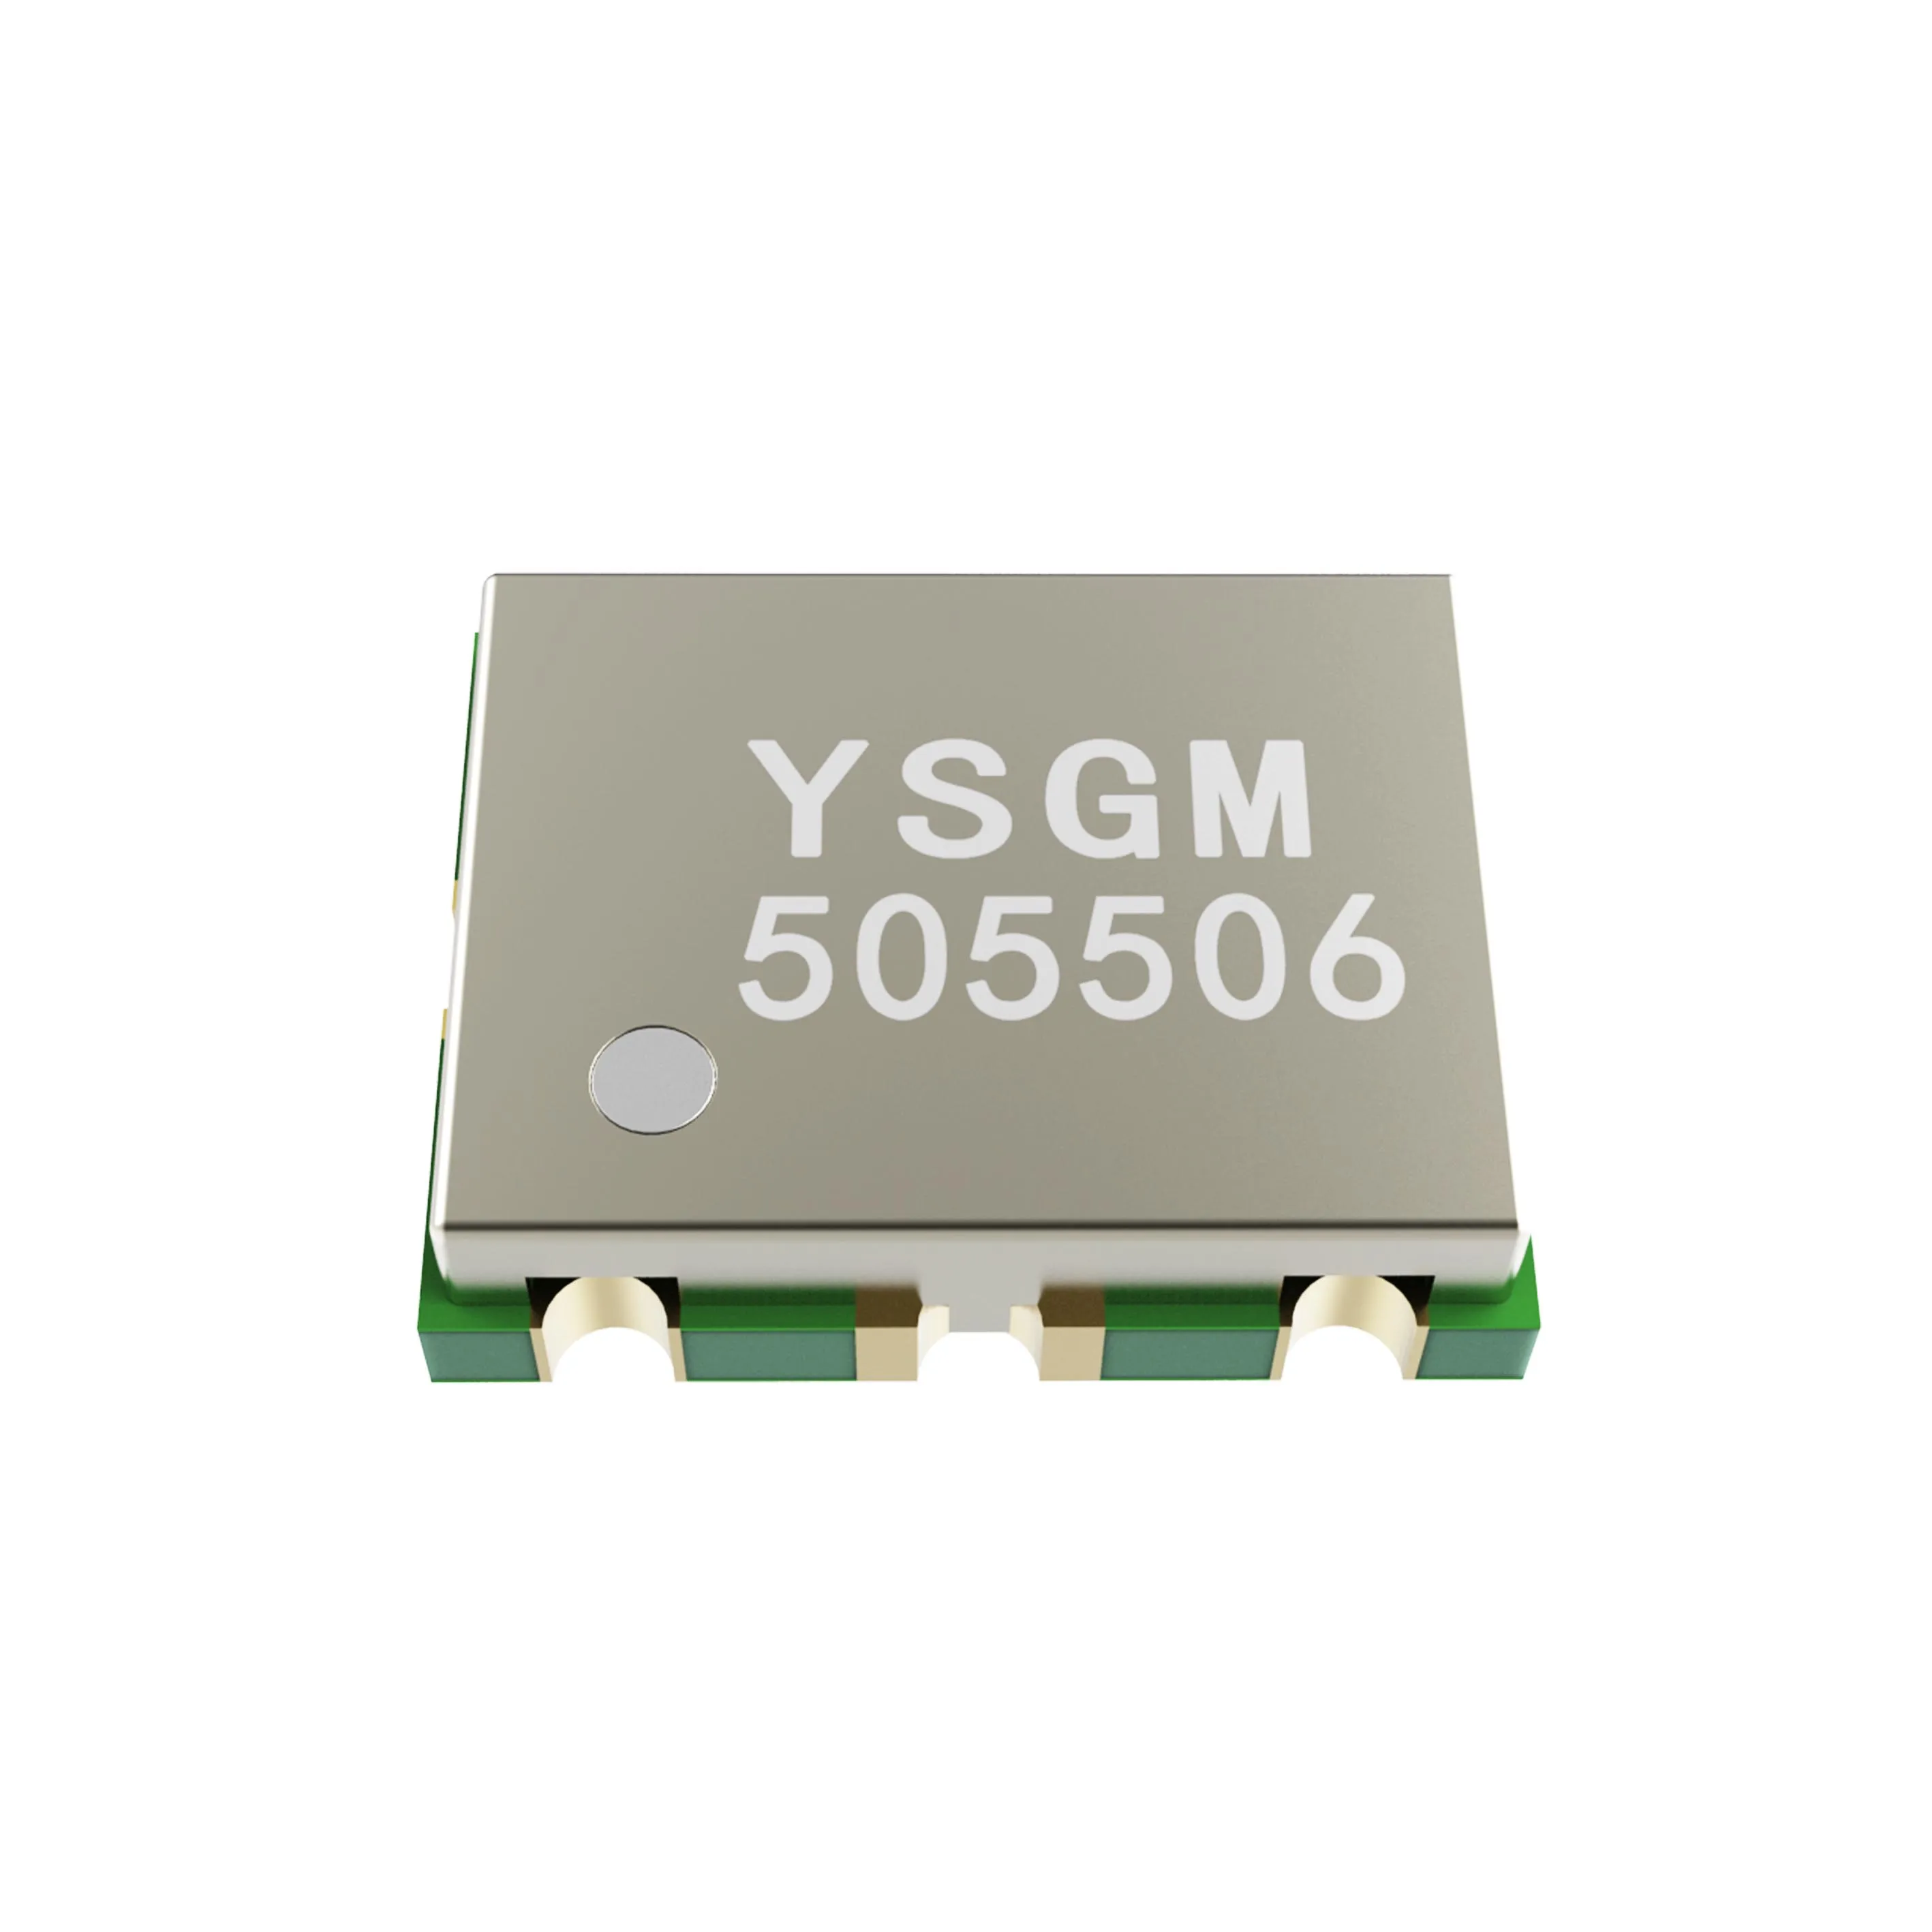 VCO Voltage Controlled Oscillator with Buffer Amplifier for IEEE 802.11a/n/ac 5150MHz-5350MHz 1pcs lot hmc515lp5etr hmc515lp5e hmc515lp5 qfn 32 voltage controlled oscillator vco 5750mhz to 6250mhz new